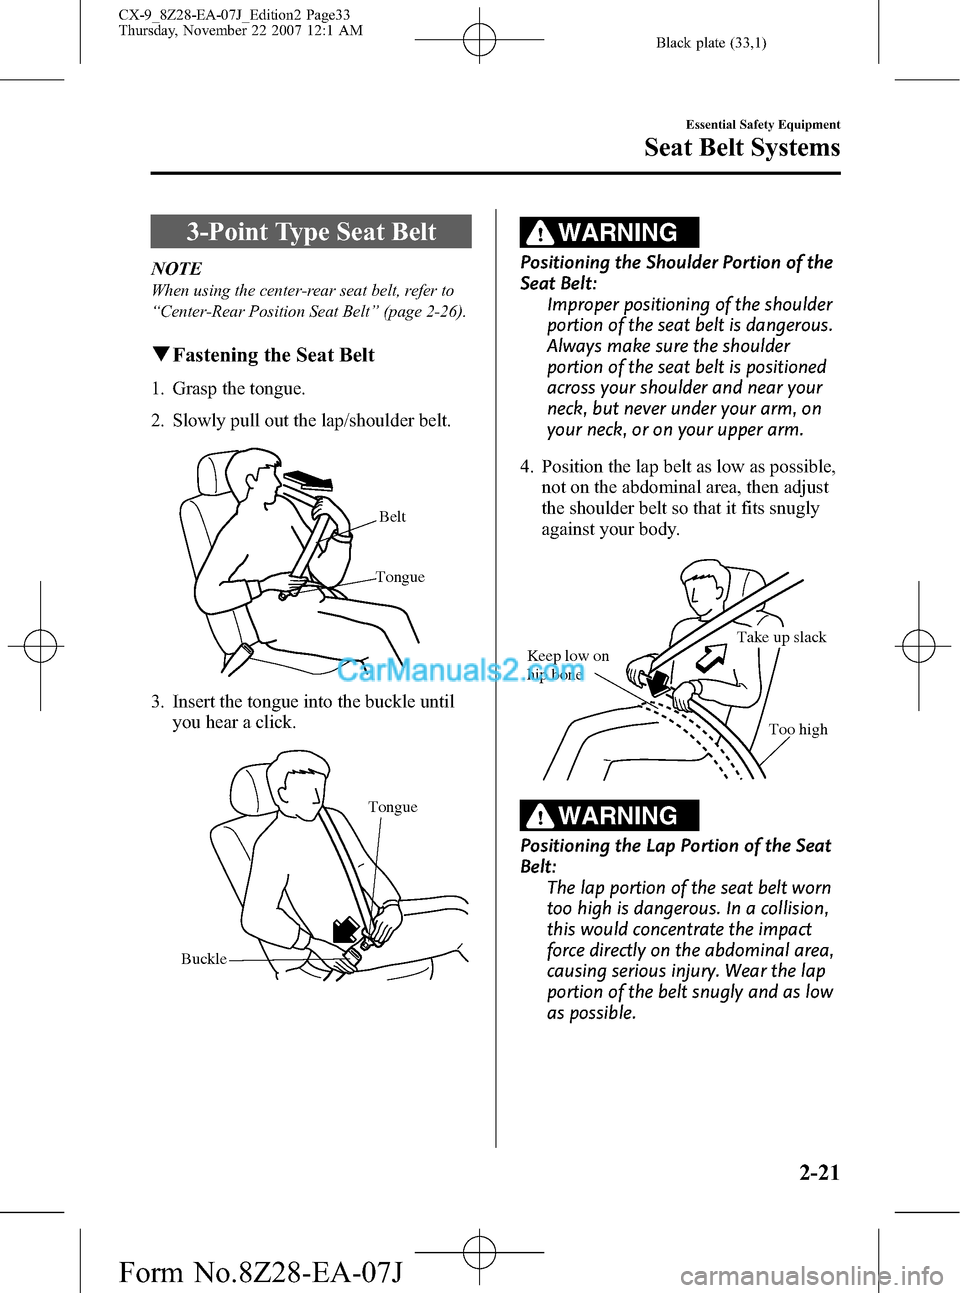 MAZDA MODEL CX-9 2008   (in English) Owners Guide Black plate (33,1)
3-Point Type Seat Belt
NOTE
When using the center-rear seat belt, refer to
“Center-Rear Position Seat Belt”(page 2-26).
qFastening the Seat Belt
1. Grasp the tongue.
2. Slowly p